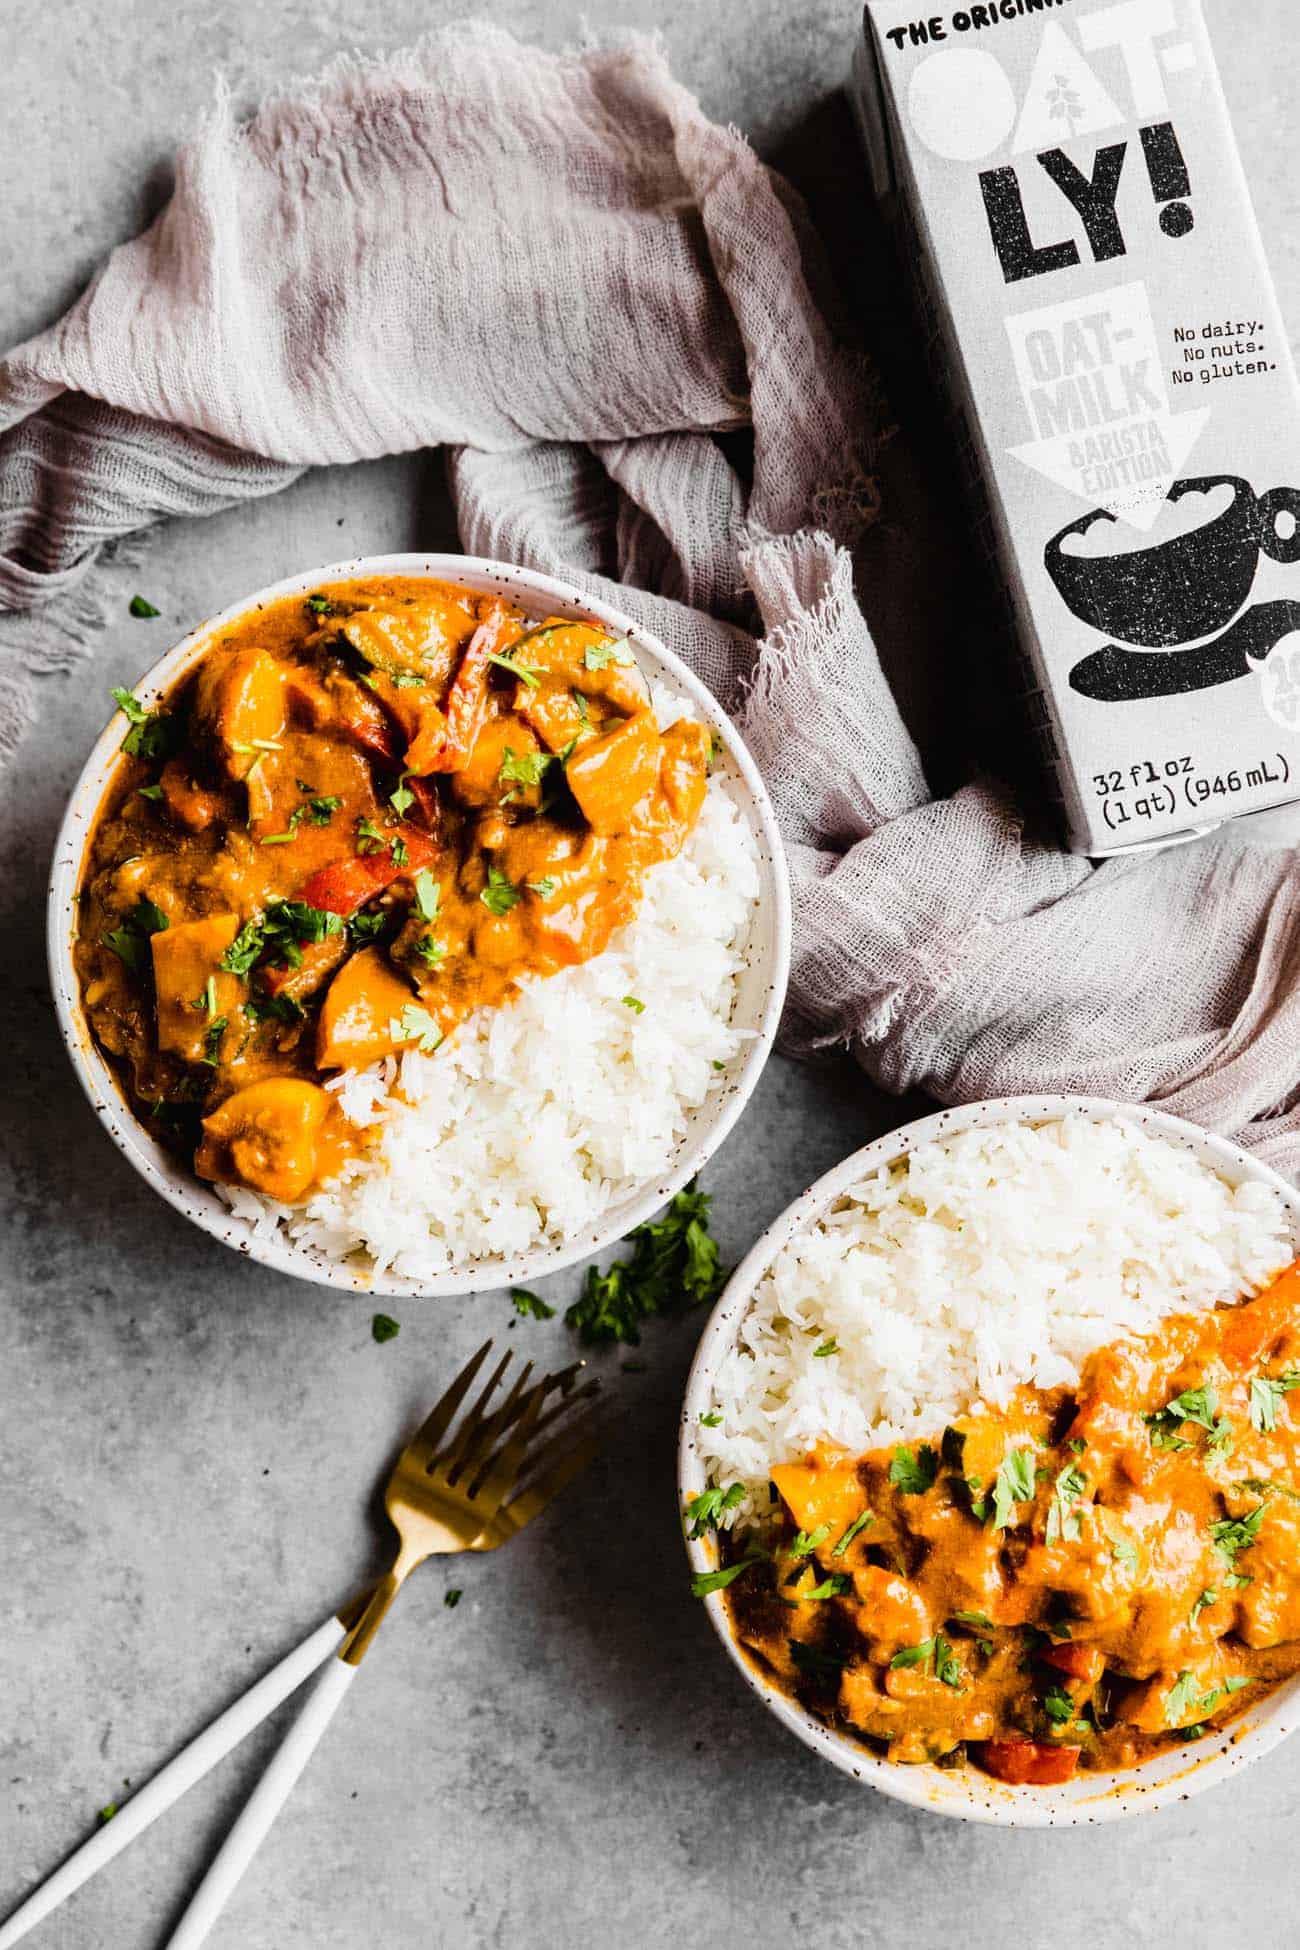 two bowls of Thai red curry with white rice and a container of Oatly